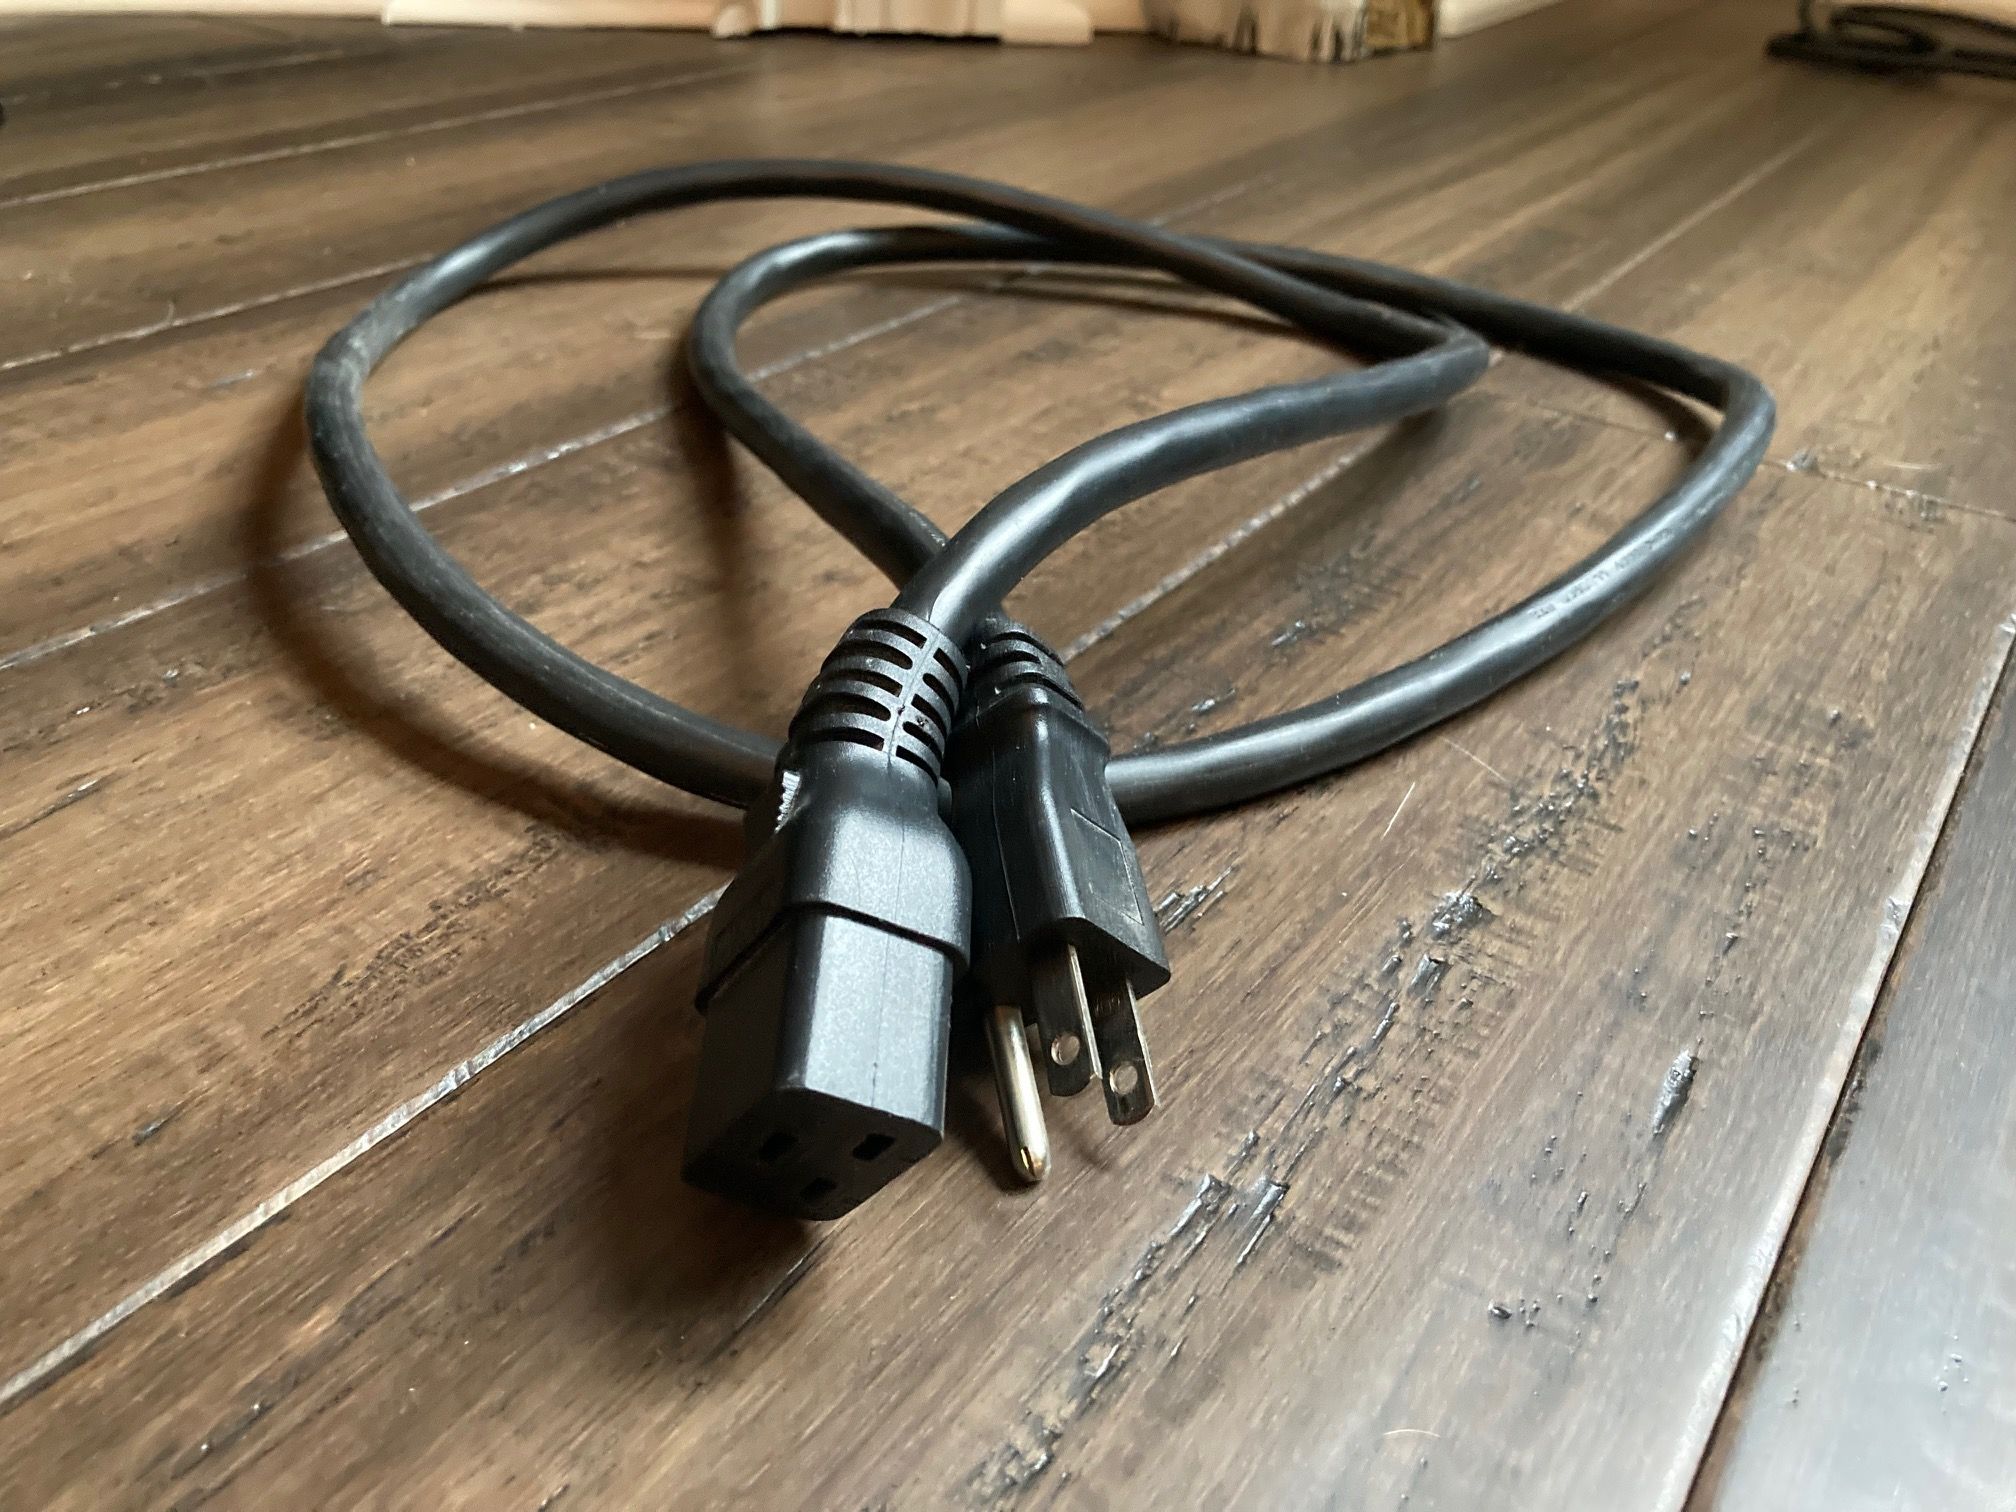 20A power cord